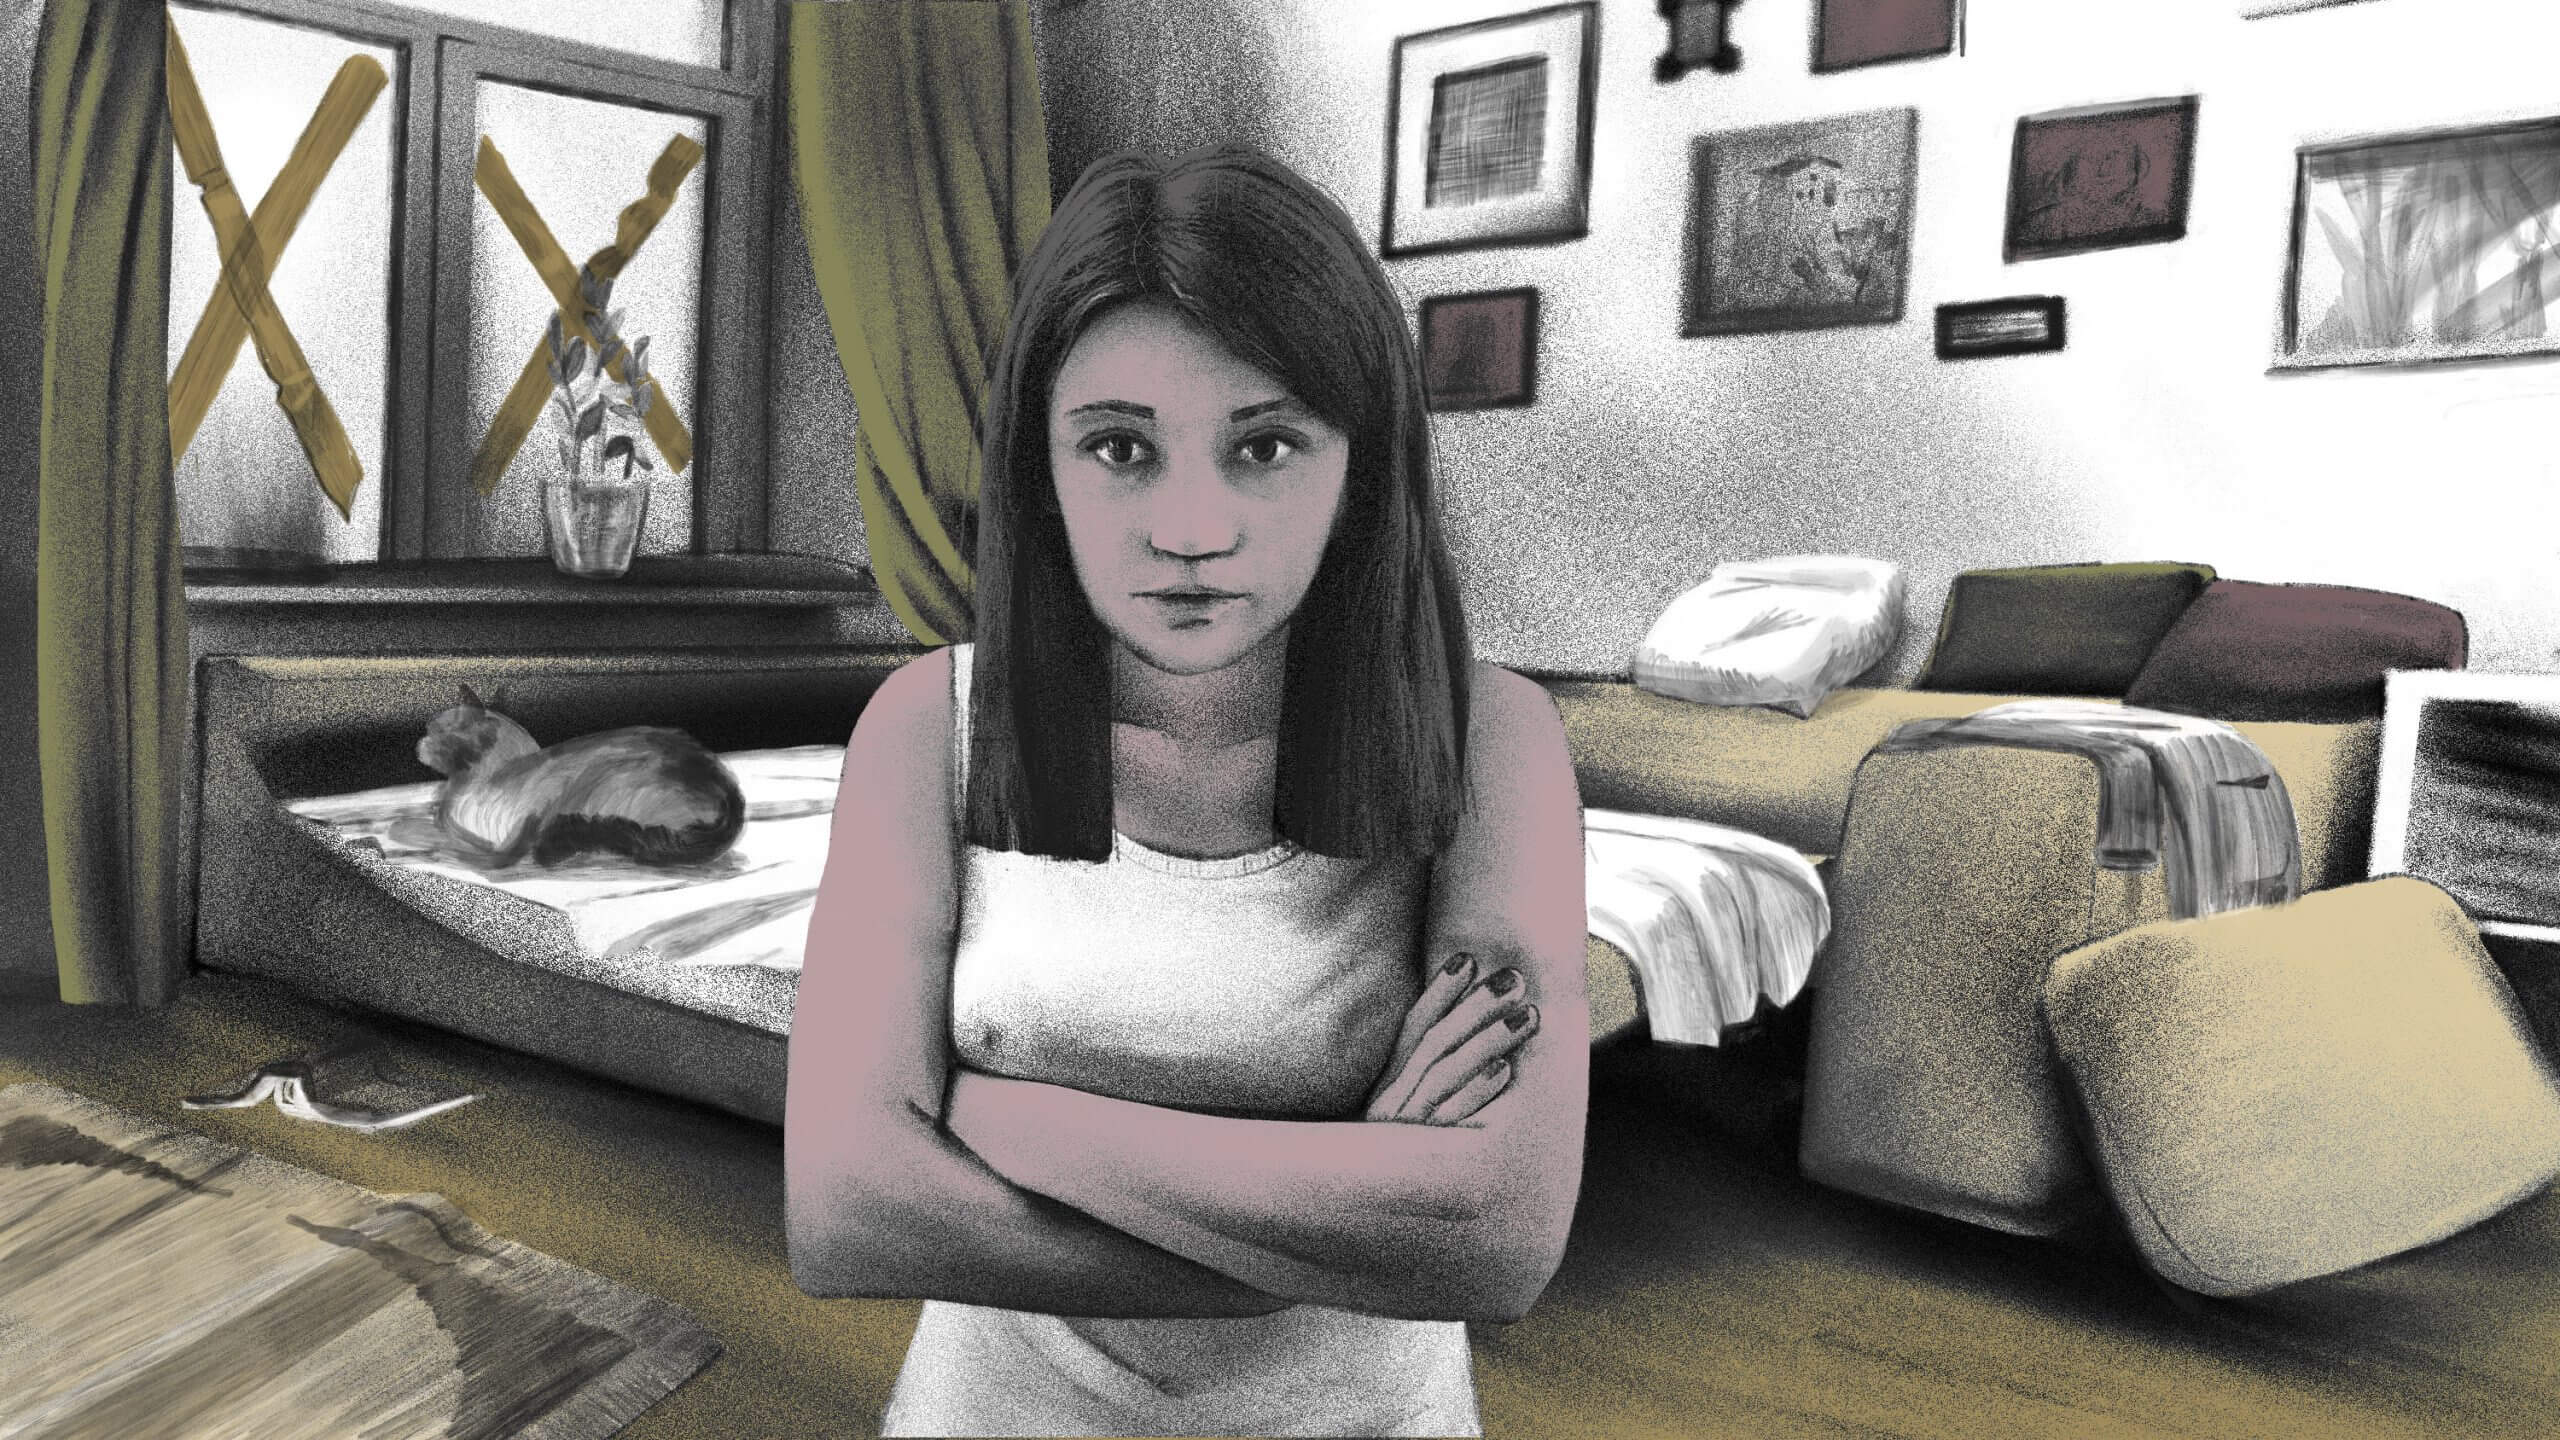 Still from Red Zone. Illustration of a young woman in the center of the frame, looking directly ahead, with her arms crossed in front of her. She as long dark hair, wears a white tank top, and is not smiling. She is in a room with a bed, paintings on the wall, and two windows that have X's taped across them.